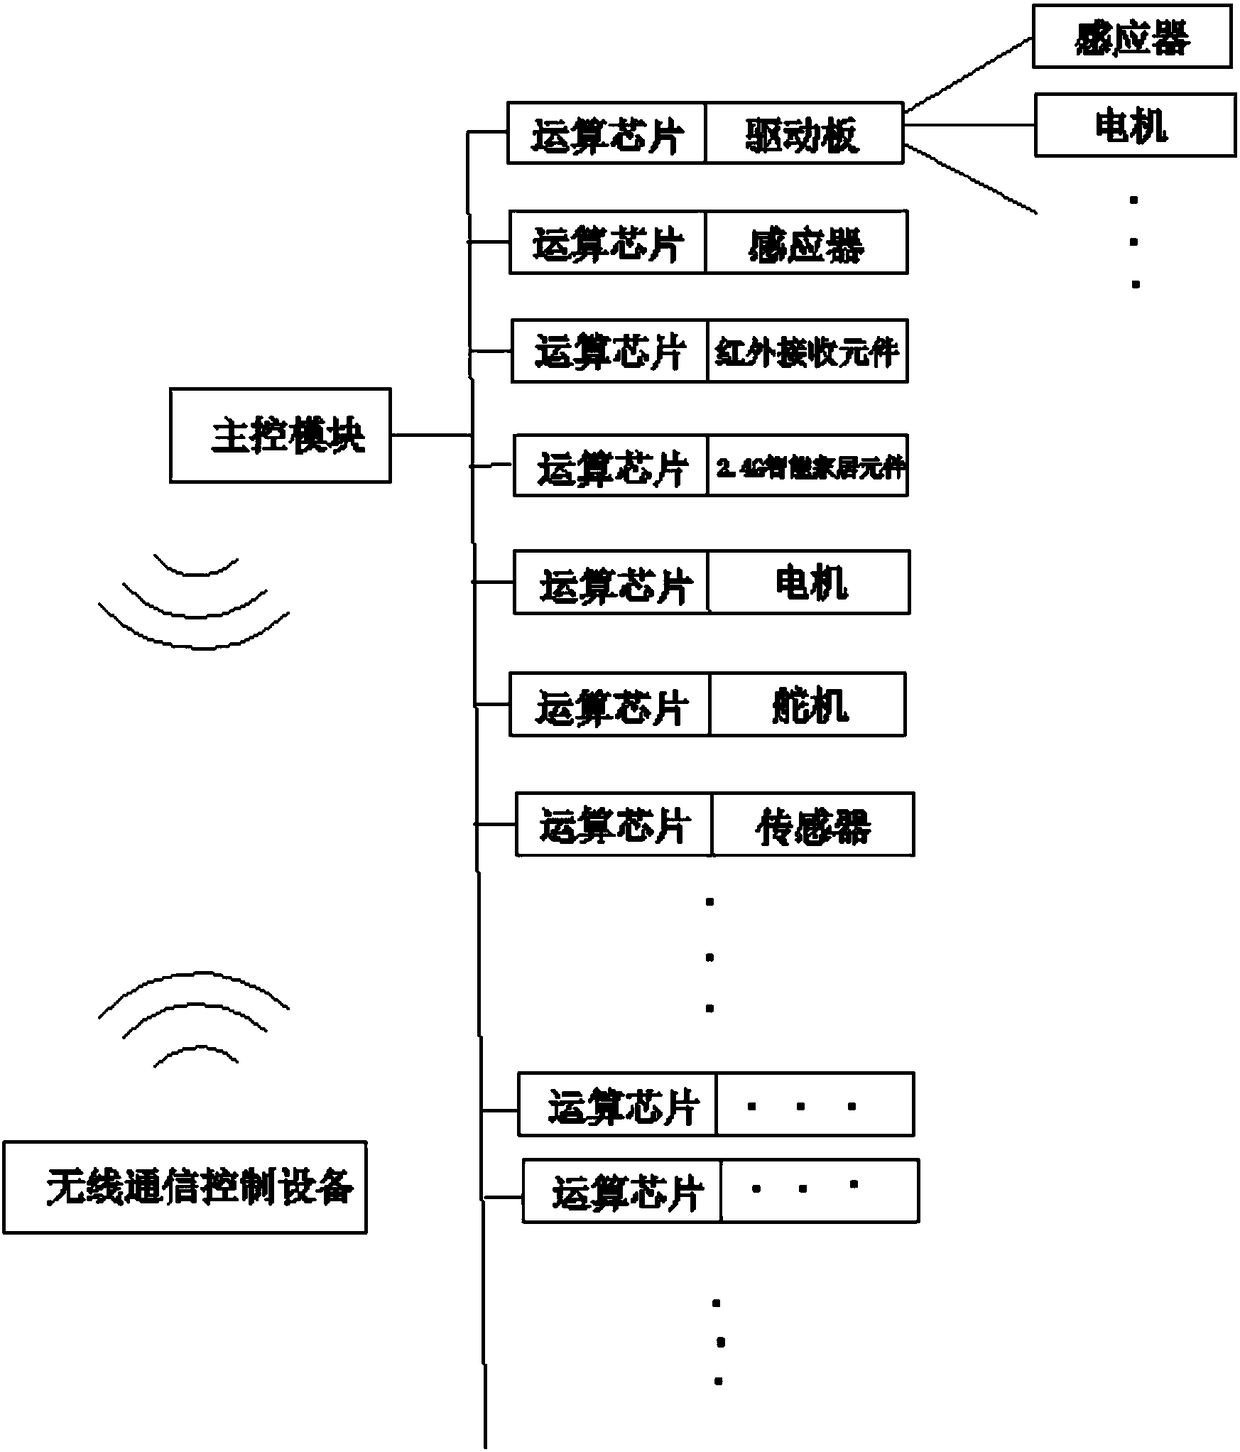 A control device based on bus communication